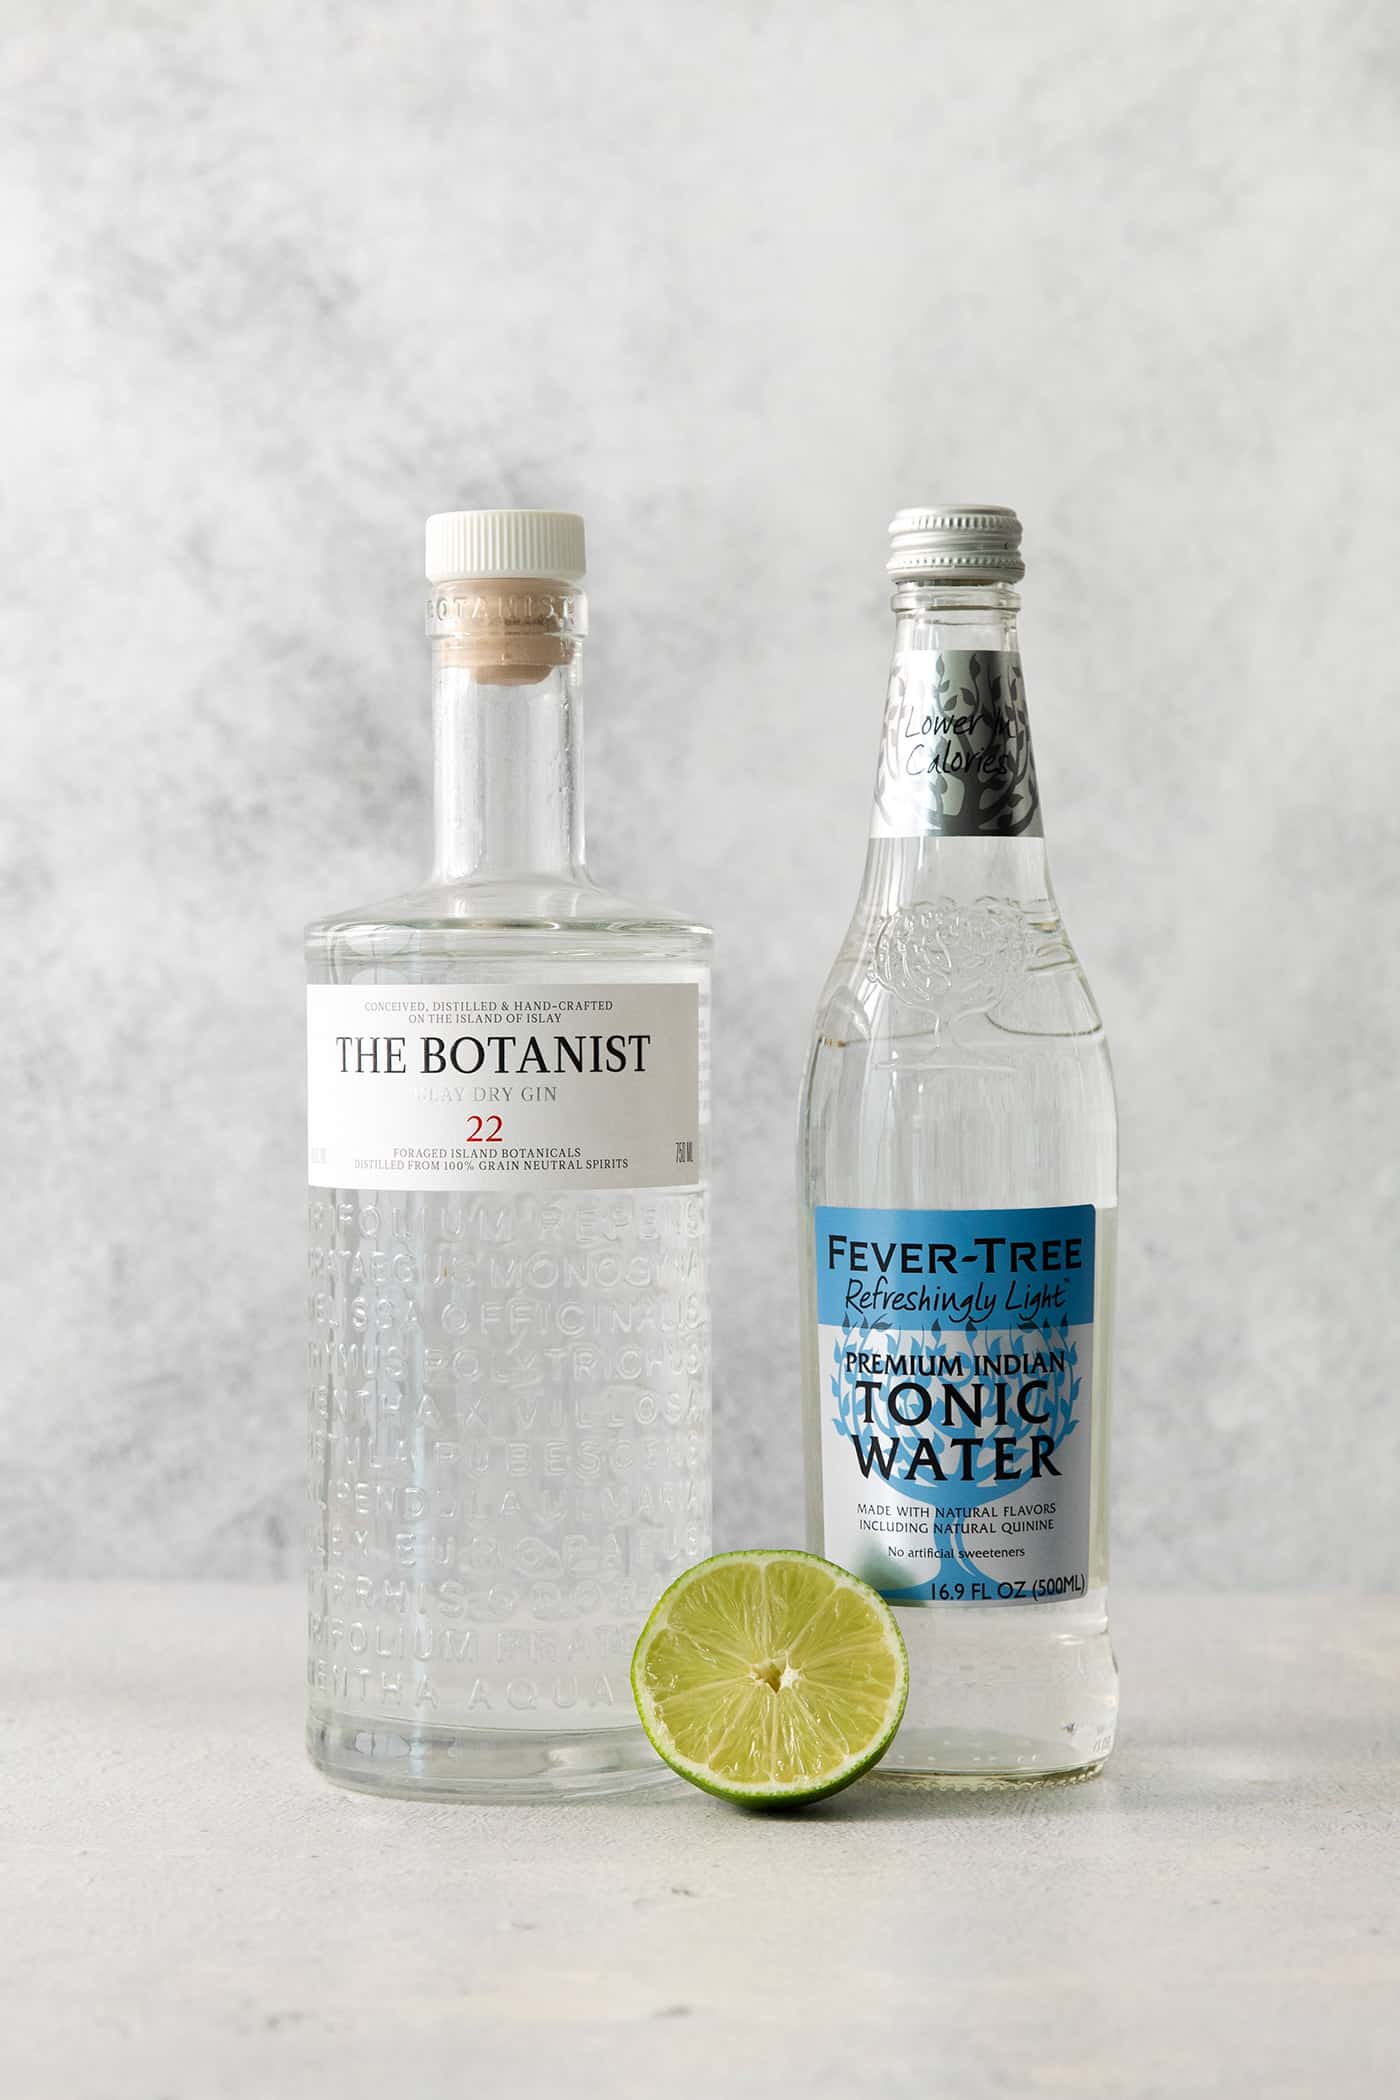 Ingredients for gin and tonic: lime, gin, and tonic water.